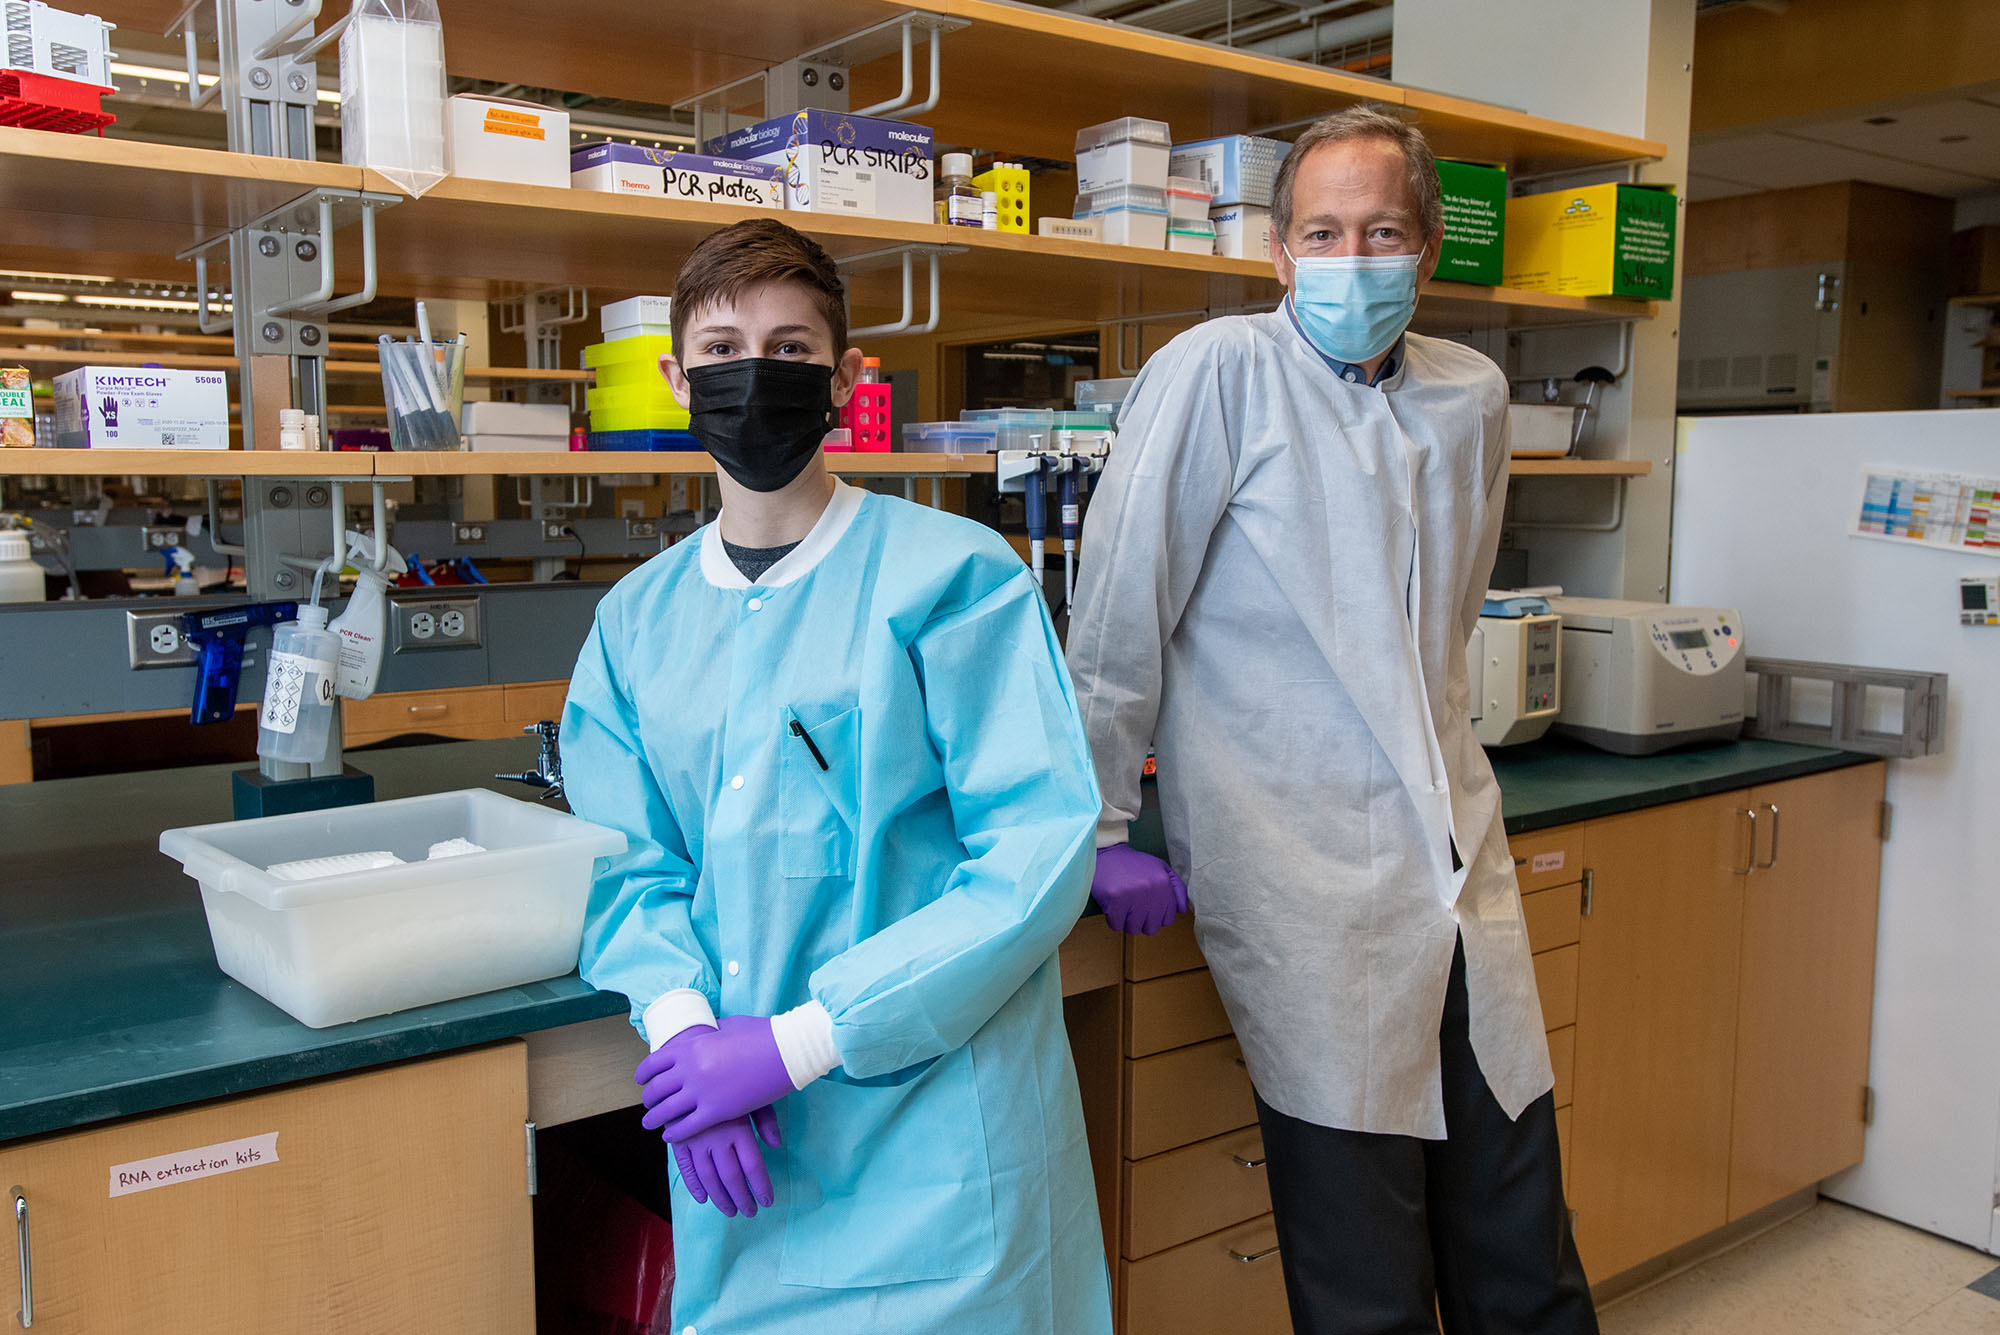 NEIDL scientists Jackie Turcinovic (left) and John Connor (right) in a science lab.